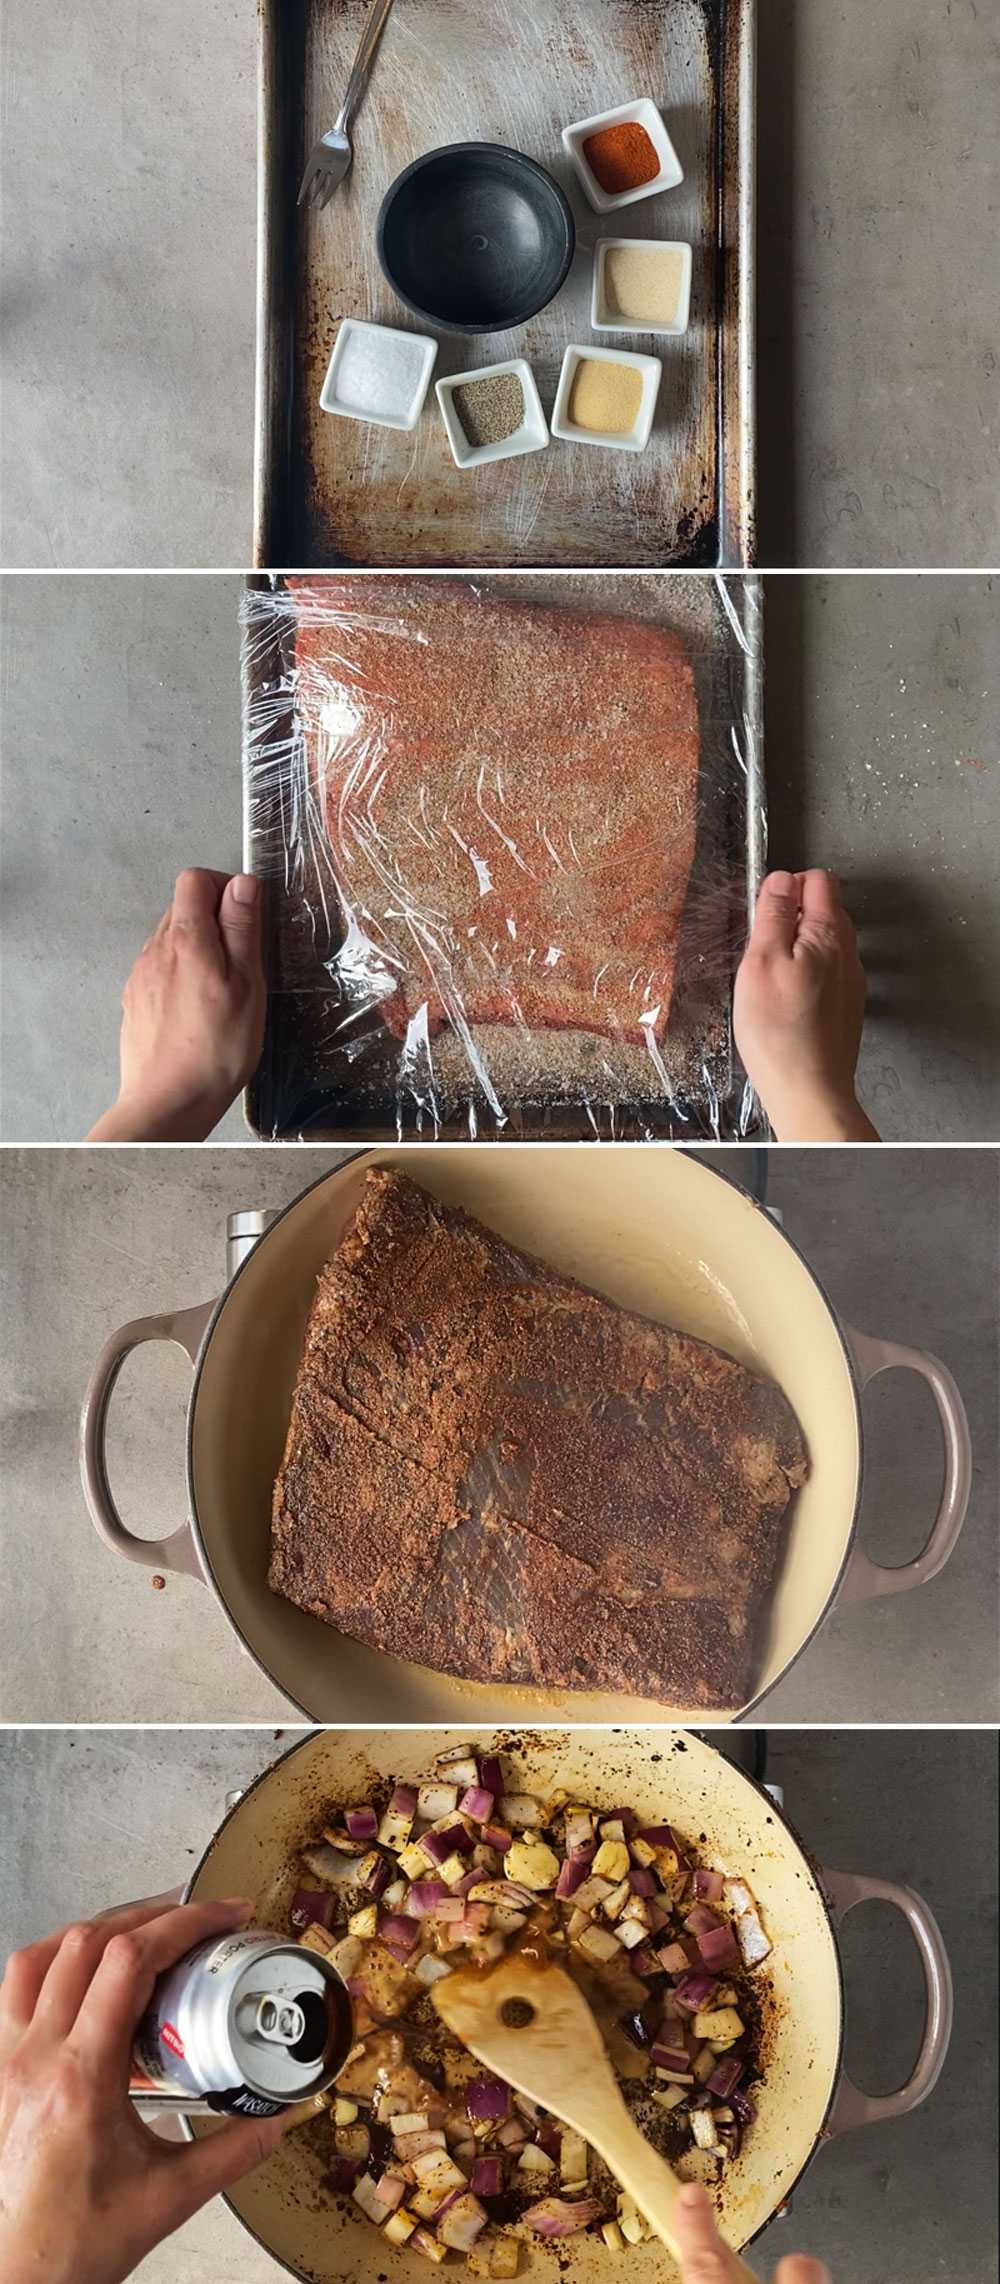 Step by step image collage on how to make beer brisket. Part 1